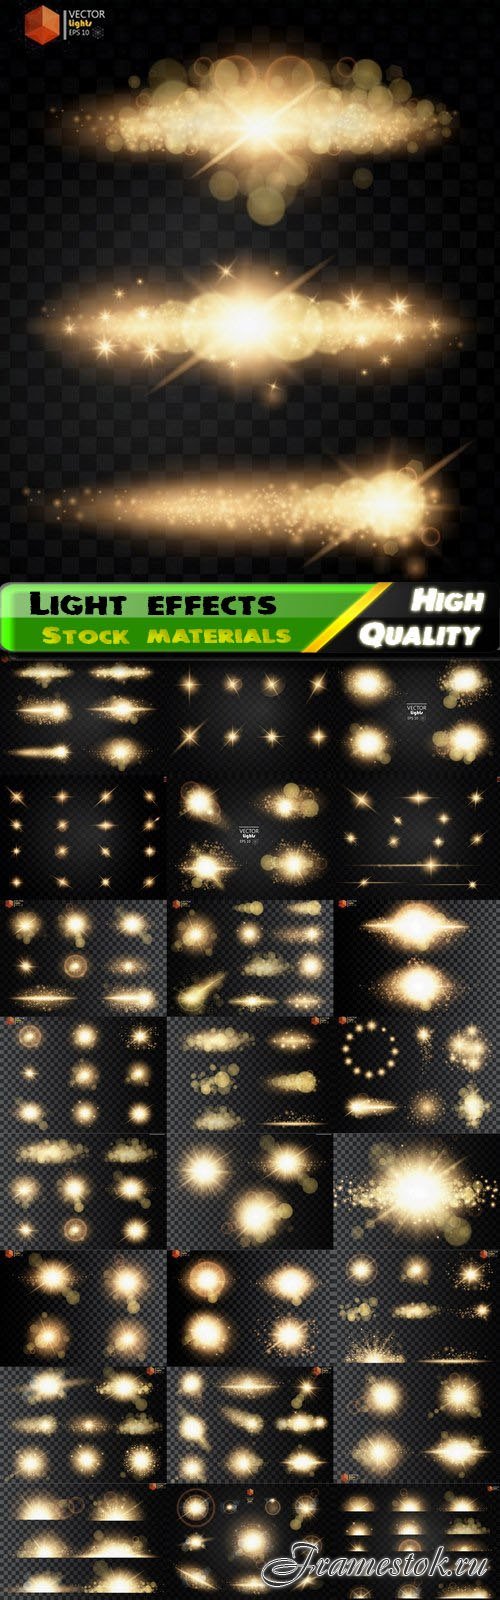 Gloving light effects ray shining star sun particles and sparks 25 Eps